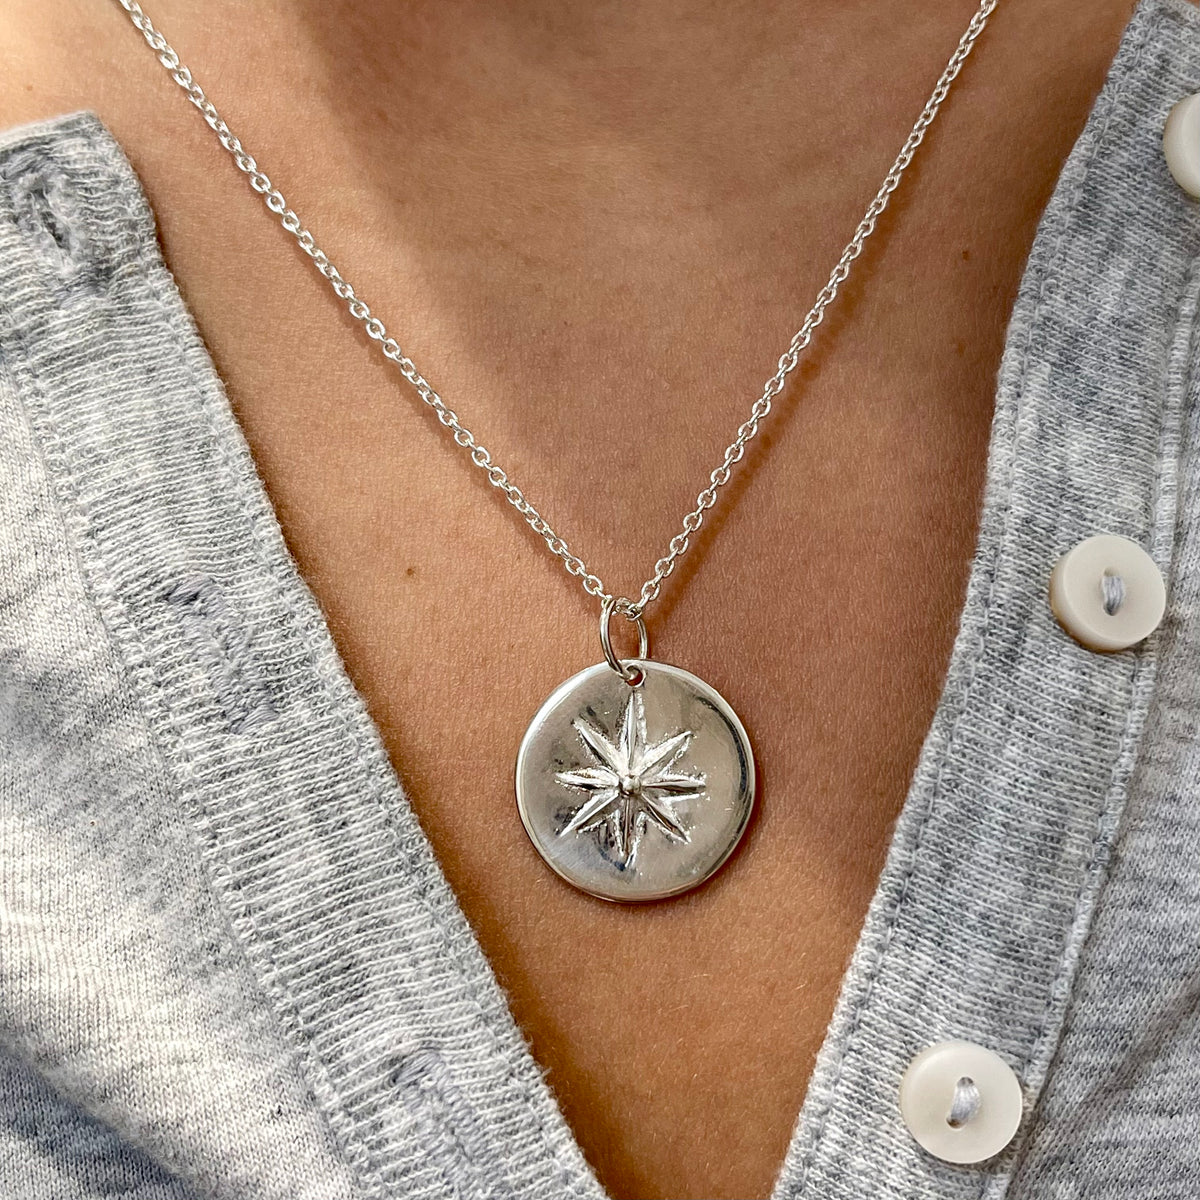 Sterling Silver and Sterling Vermeil 8 Pt. Star Medallion Necklace |  PennyweightsJewelry